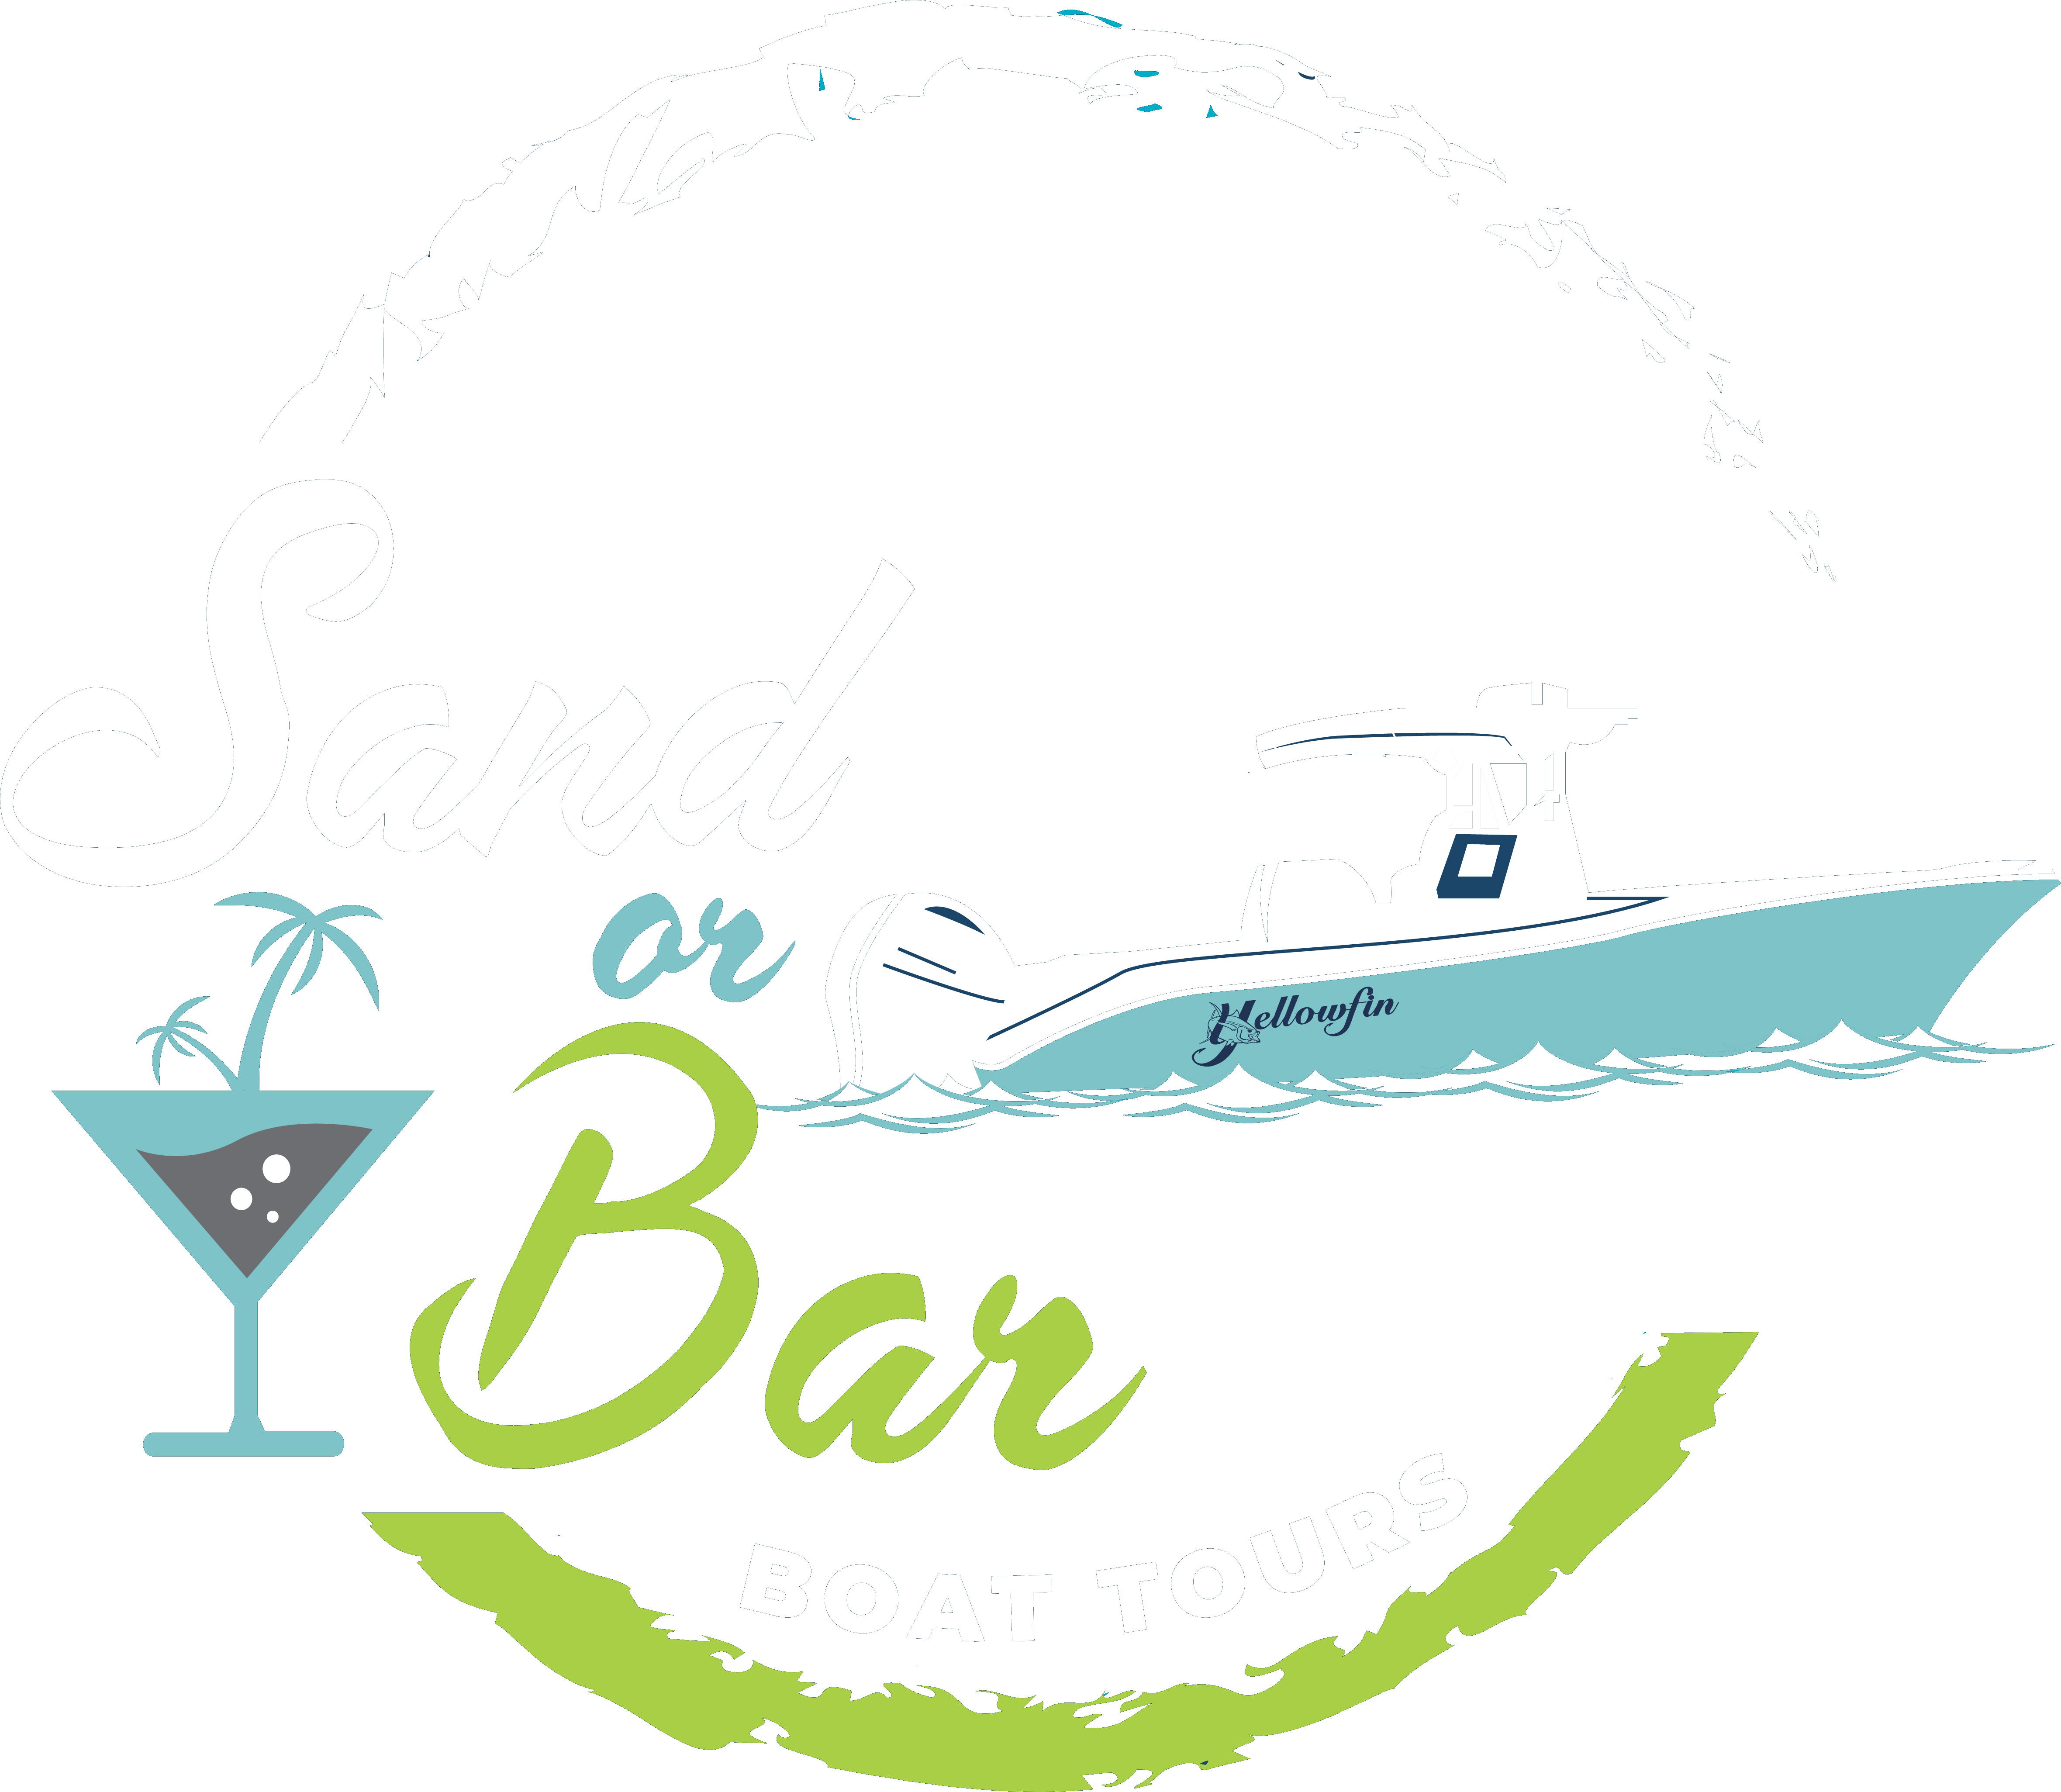 Sand or Bar Boat Tours